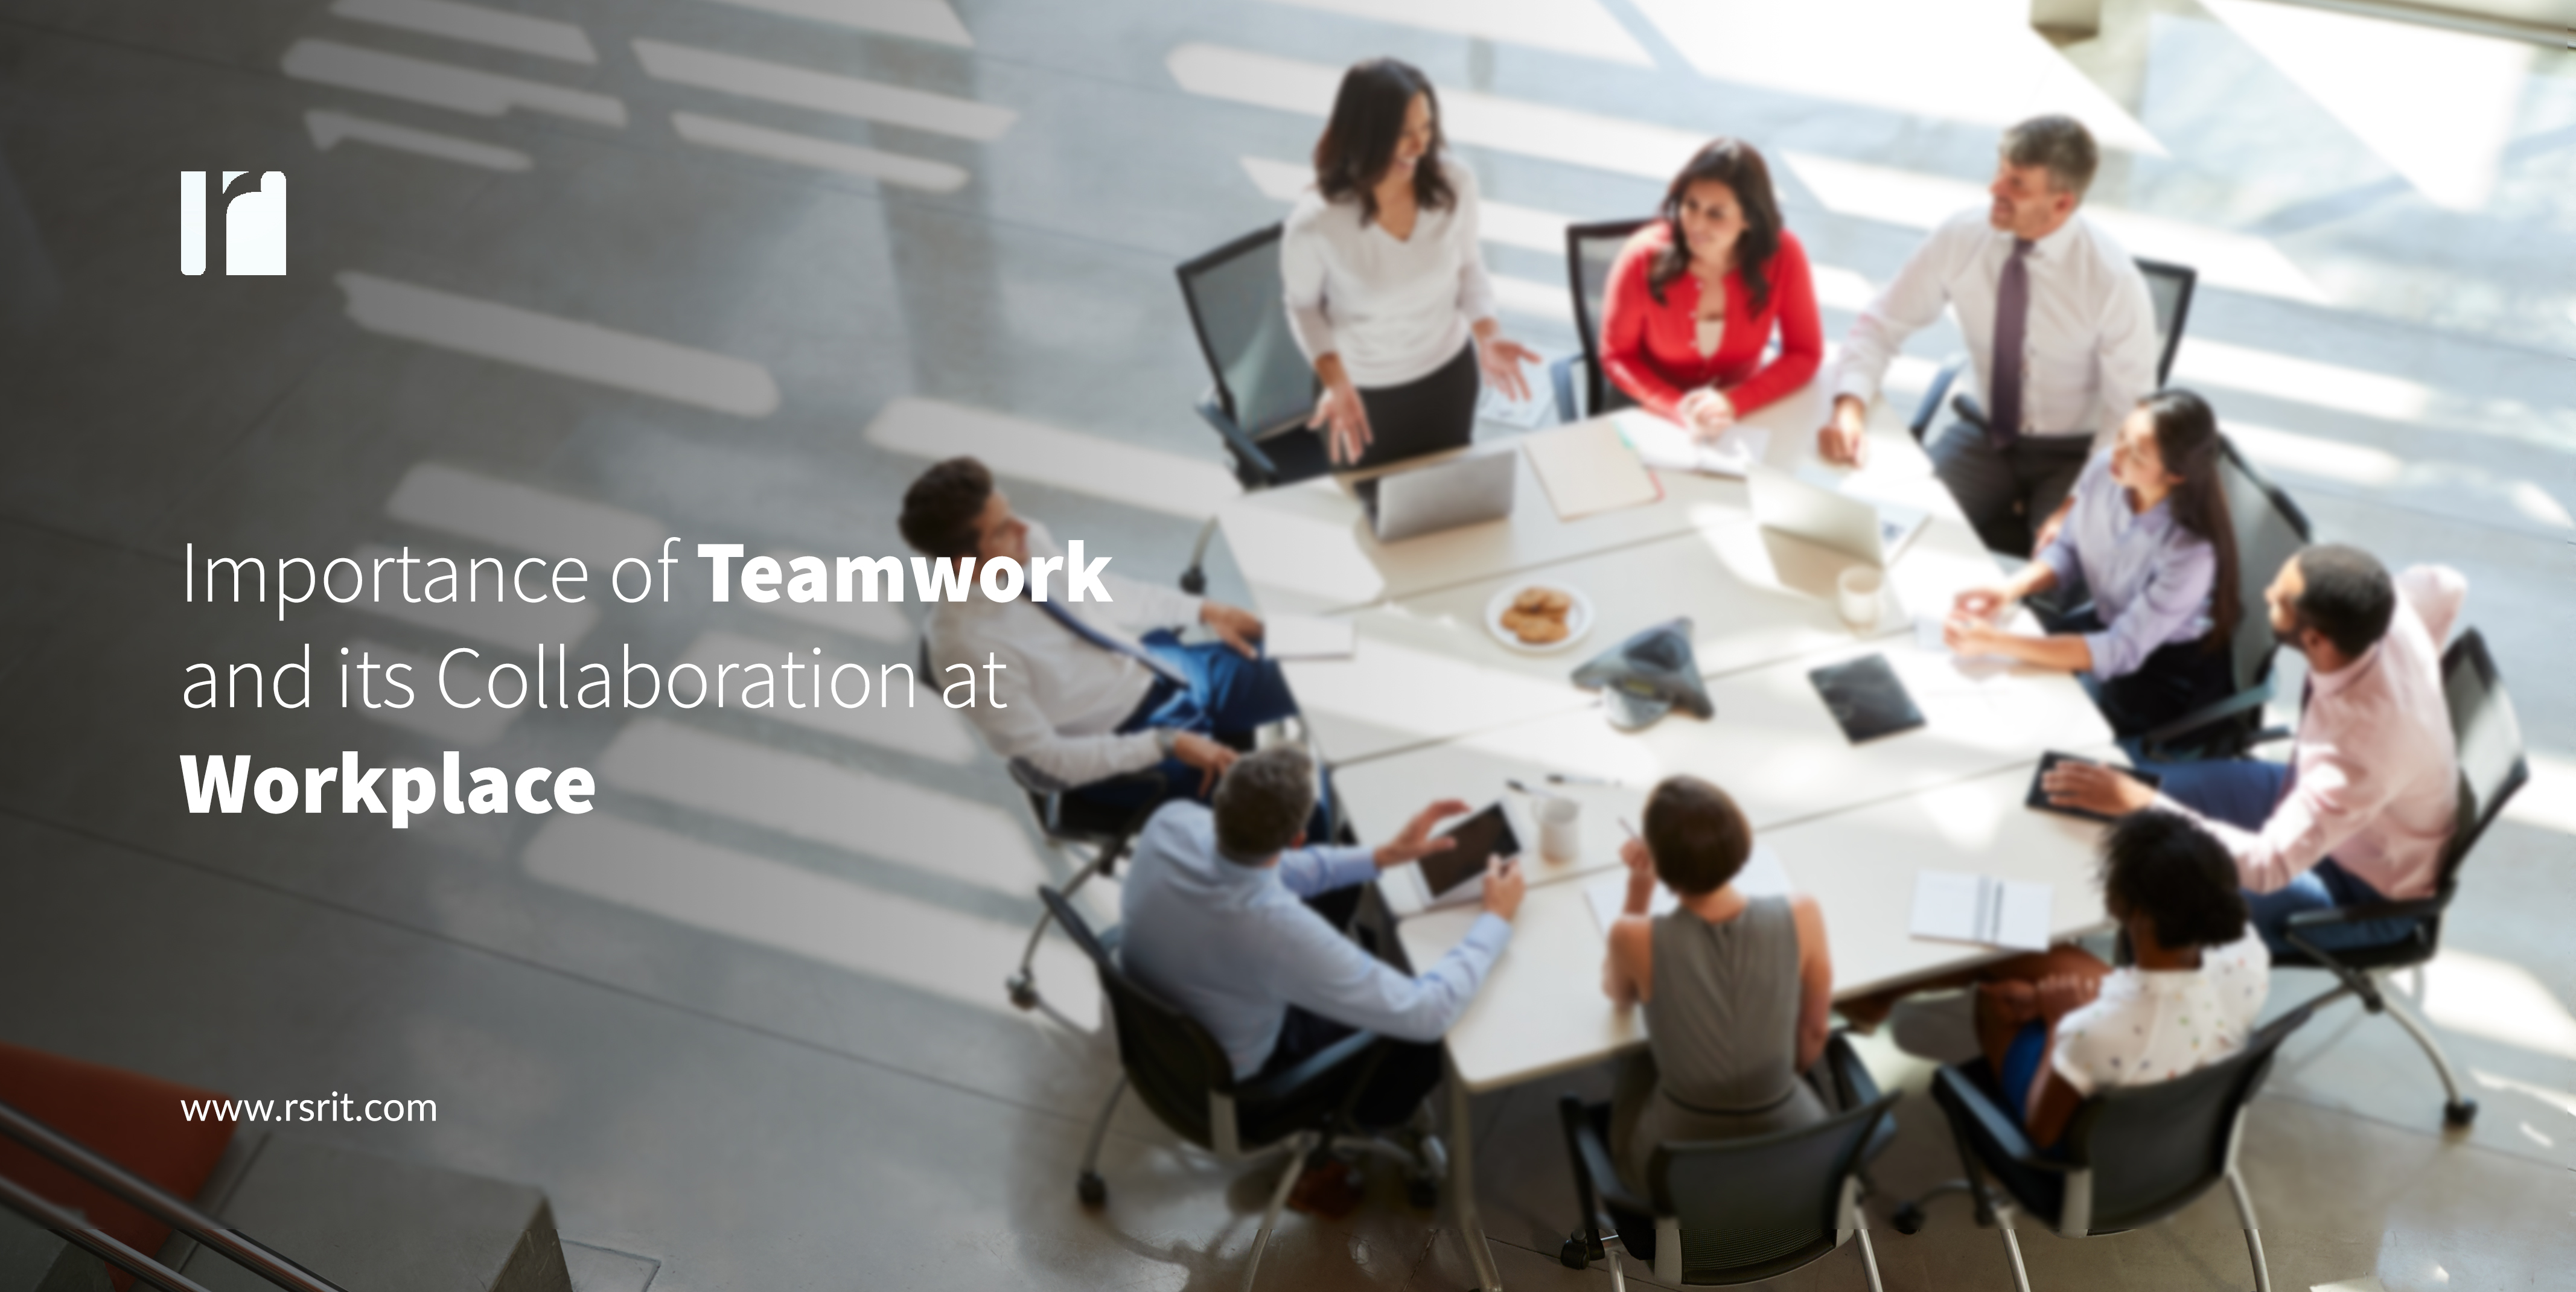 Importance of Teamwork and its Collaboration at Workplace